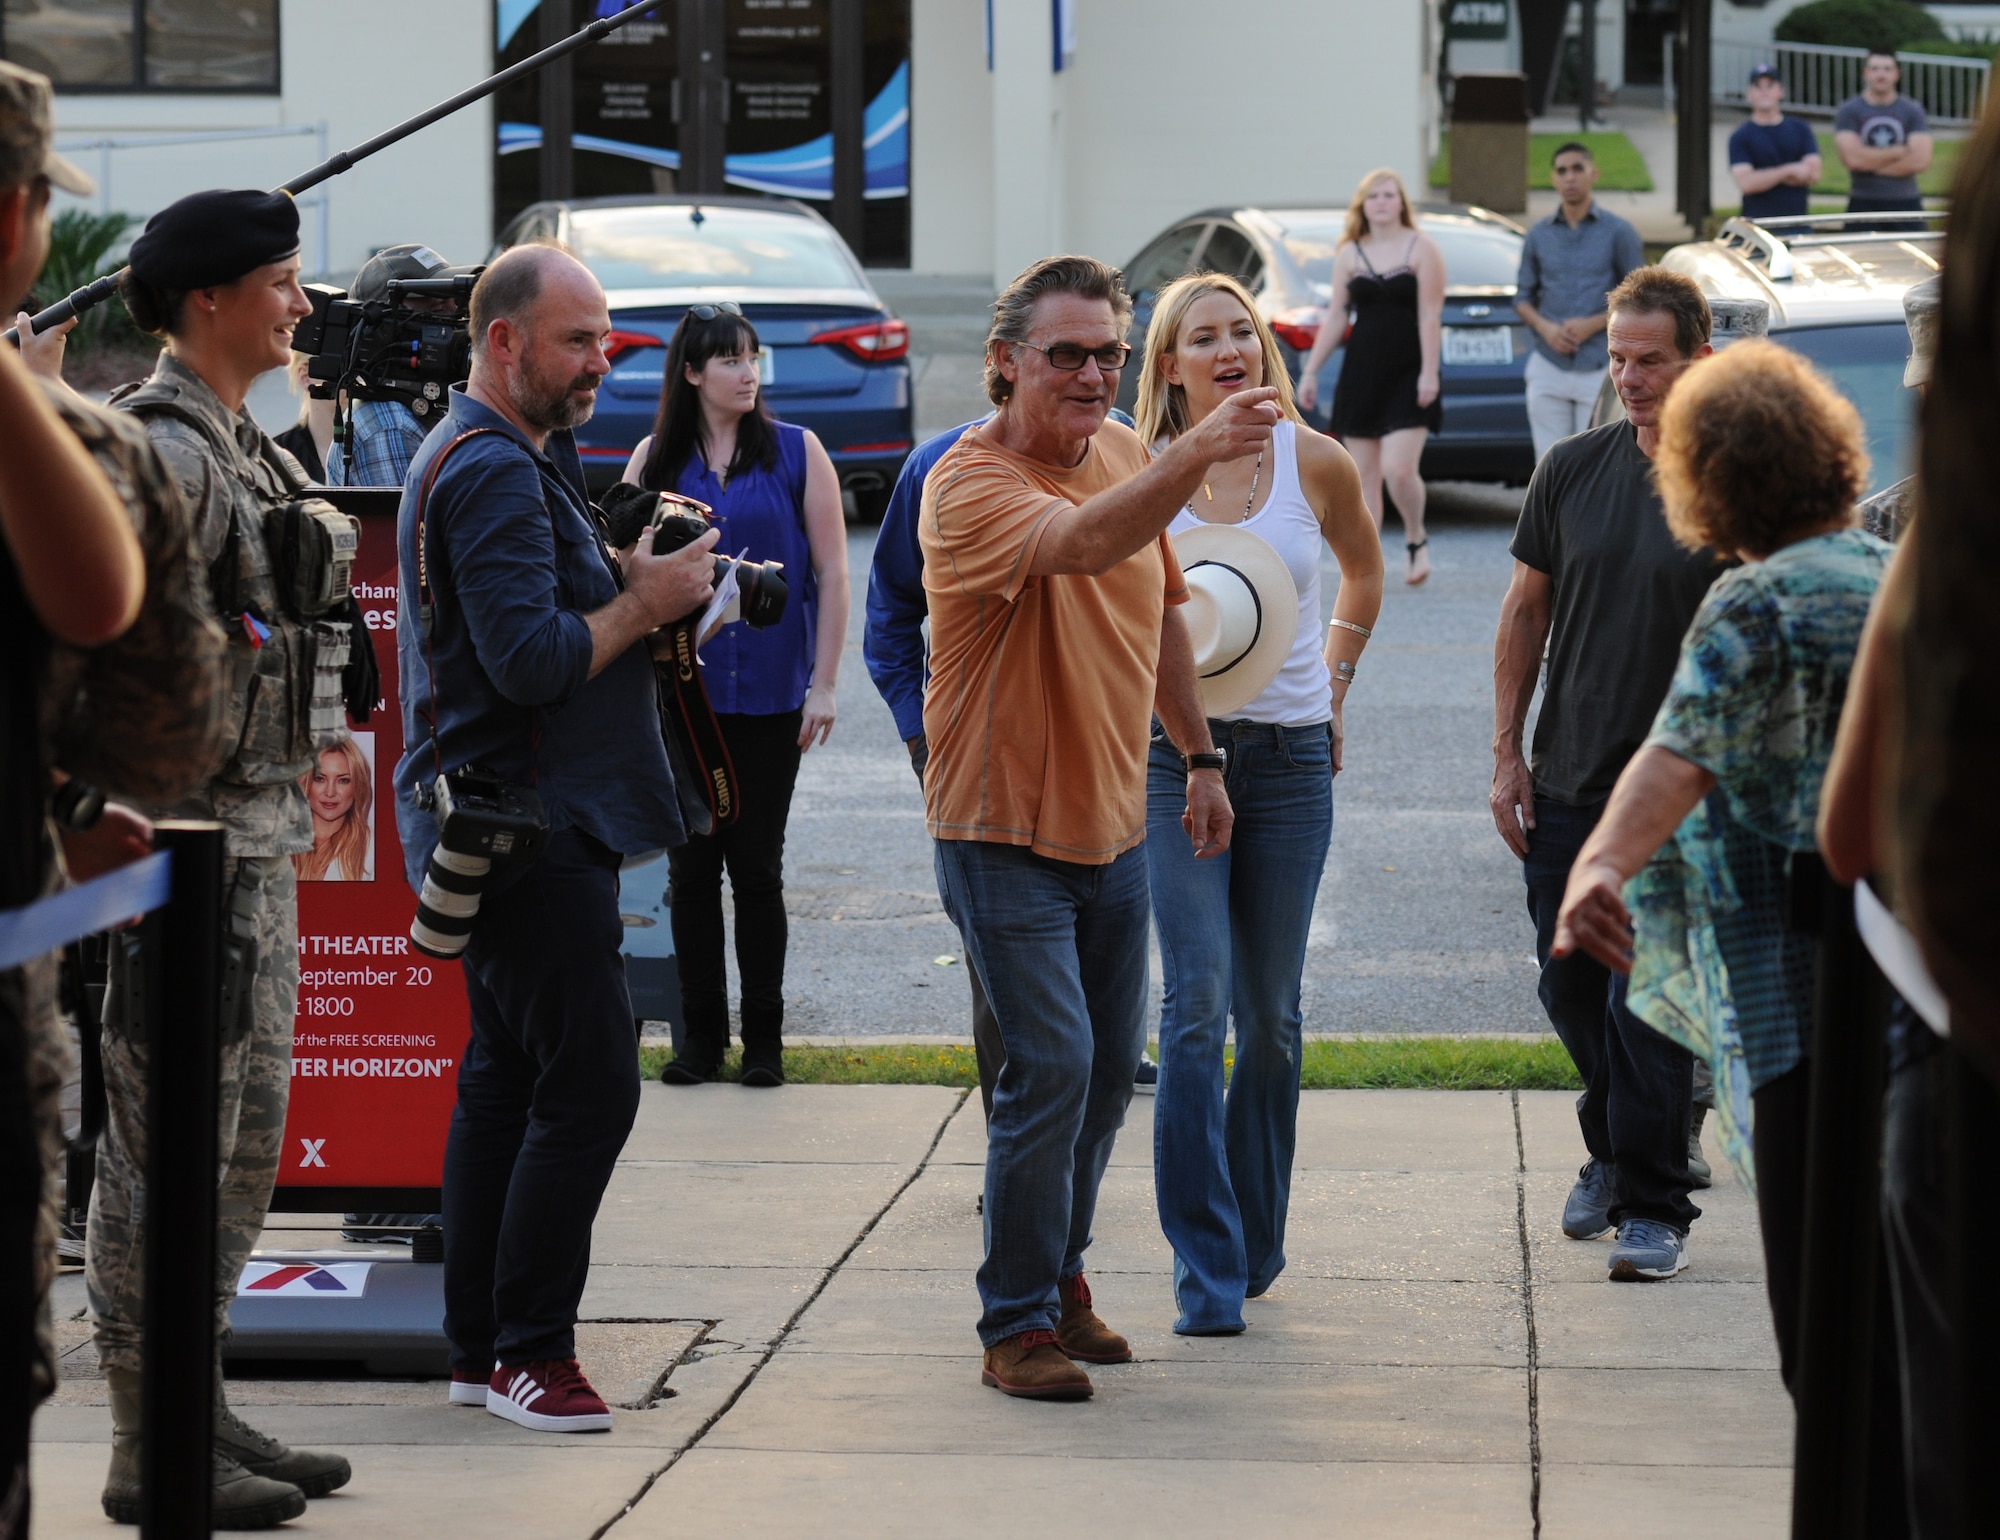 Kurt Russell and Kate Hudson, Deepwater Horizon actors, arrive at the Welch Theater before the Deepwater Horizon movie screening Sept. 20, 2016, on Keesler Air Force Base, Miss. Before the screening, Russell, Hudson and movie director, Peter Berg, took a short tour of the 81st Training Wing and 403rd Wing to meet with Airmen and learn about their missions at Keesler. (U.S. Air Force photo by Kemberly Groue/Released)